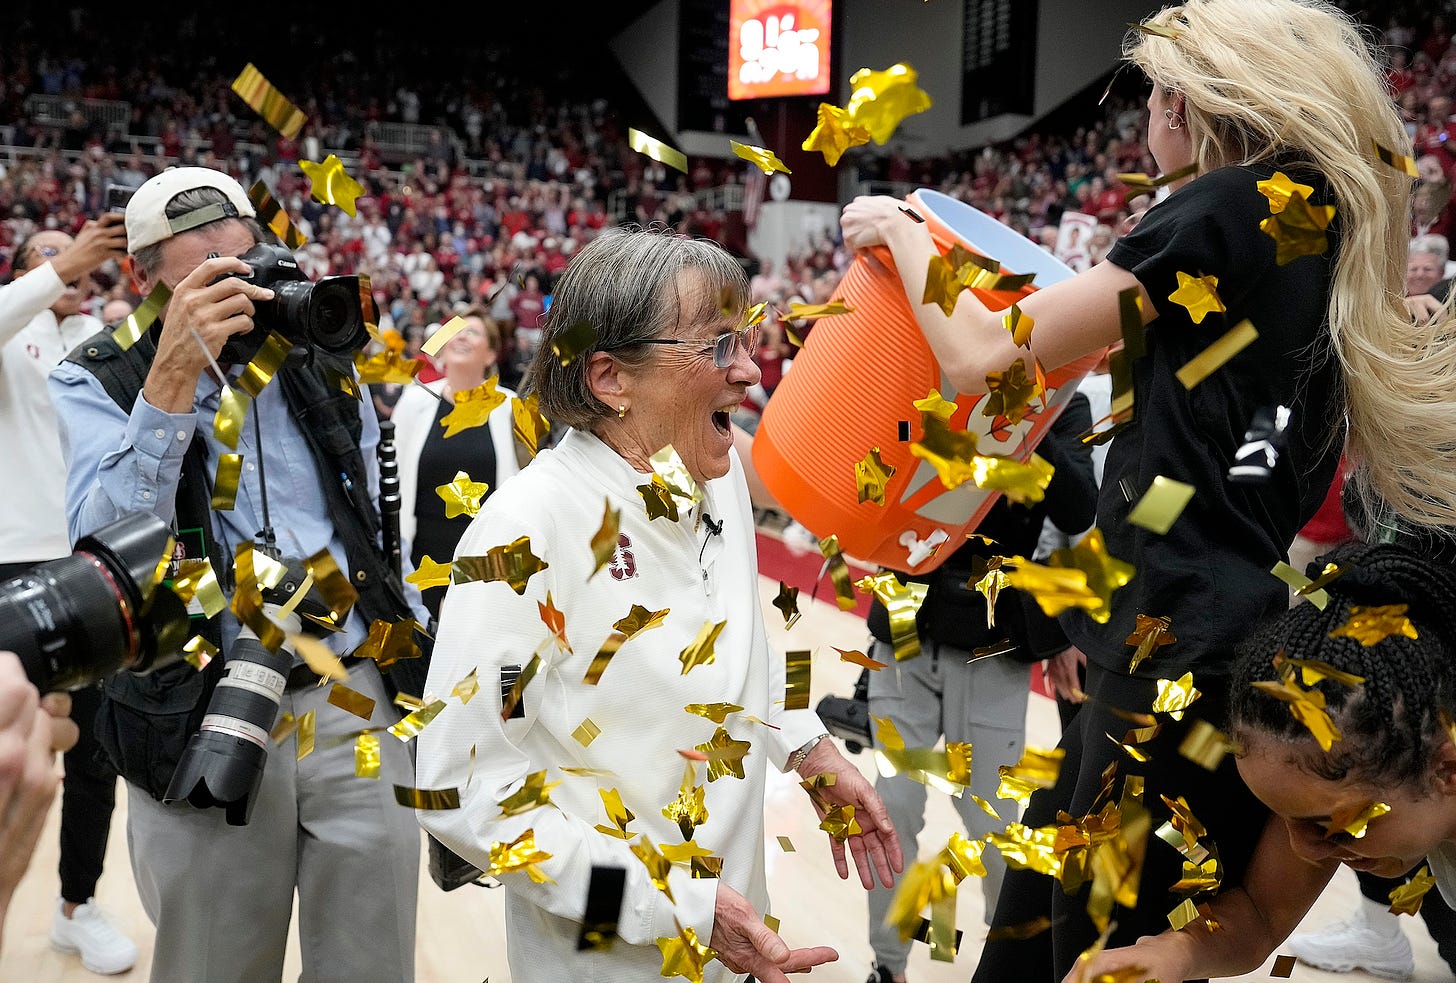 PALO ALTO, CALIFORNIA - JANUARY 21: Head coach Tara VanDerveer of the Stanford Cardinal celebrates with her player Cameron Brink #22 after Stanford defeated the Oregon State Beavers 65-56 at Stanford Maples Pavilion on January 21, 2024 in Palo Alto, California. Tara VanDerveer recorded her 1,203 NCAA career victory passing Mike Krzyzewski with 1,202 NCAA career wins. (Photo by Thearon W. Henderson/Getty Images)